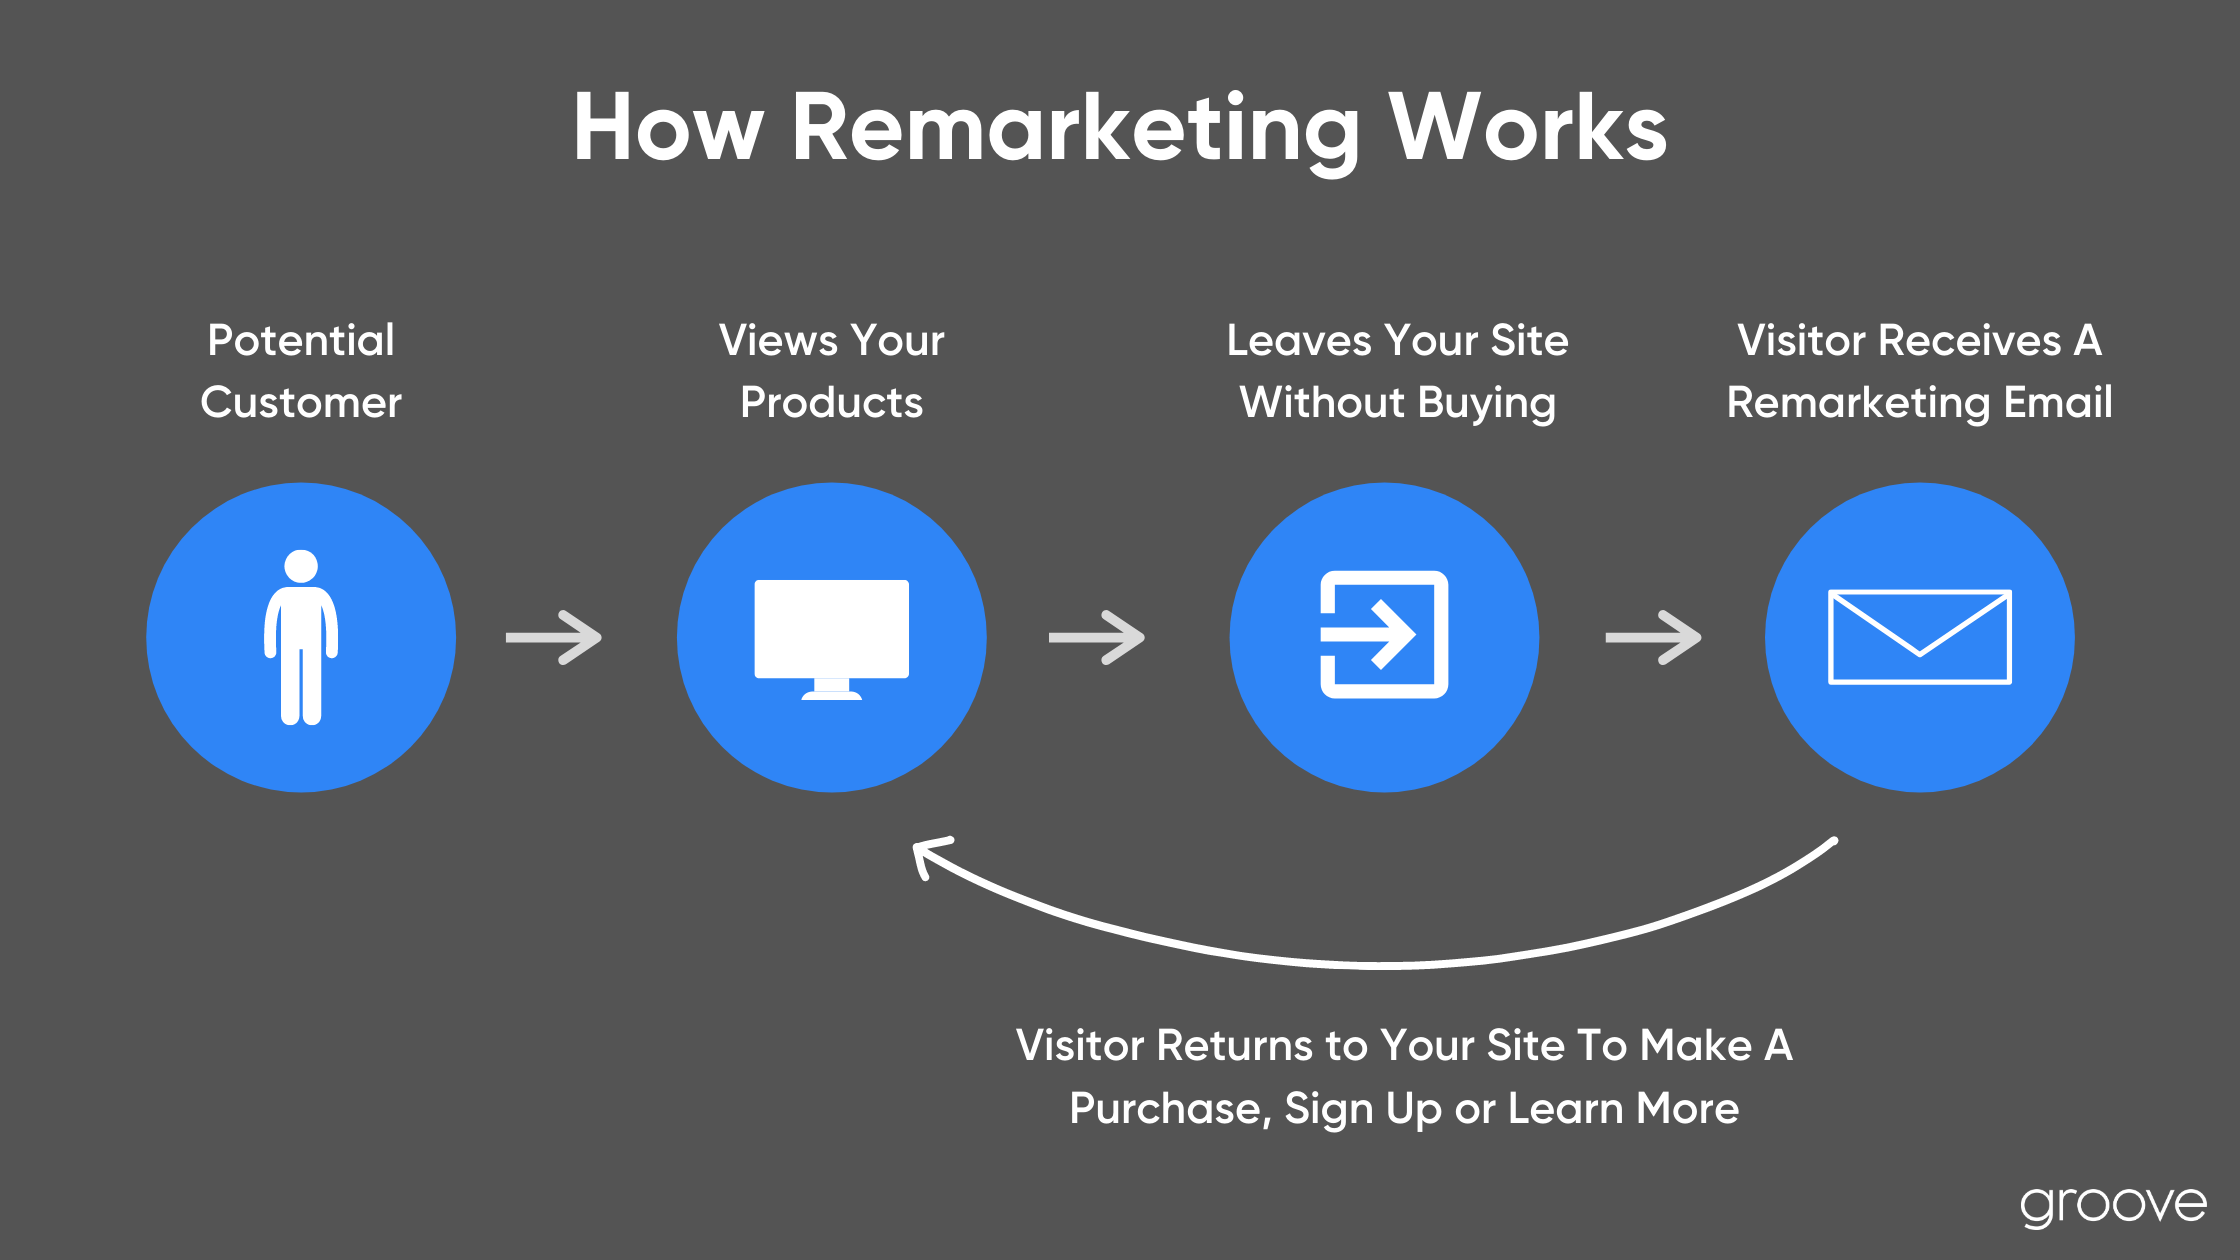 Holiday Planning: How Remarketing Works